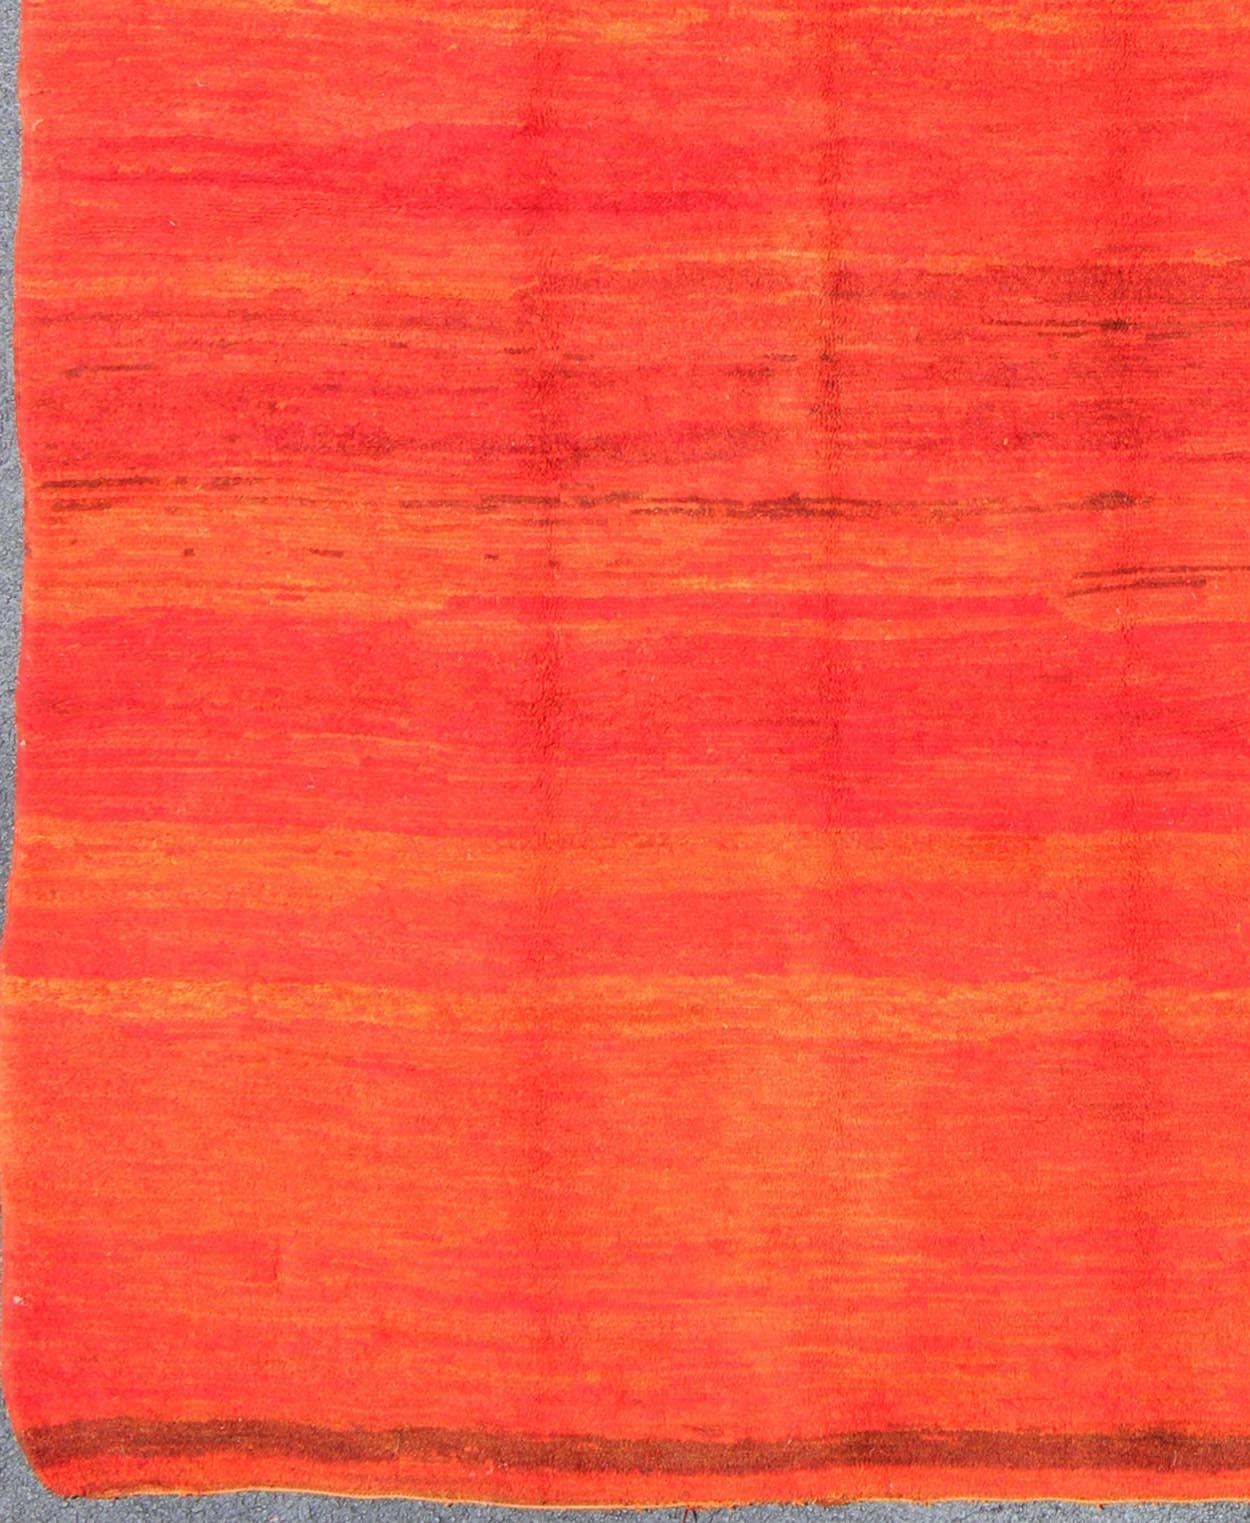 Vintage Moroccan Rug in Desert Red and Orange Colors.
This lovely vintage Moroccan rug displays a multitude of desert red and orange tones that vary throughout the solid field. 
Measures: 7'1 x 10'2.
List price $7,500.
Reduced price $6,000.